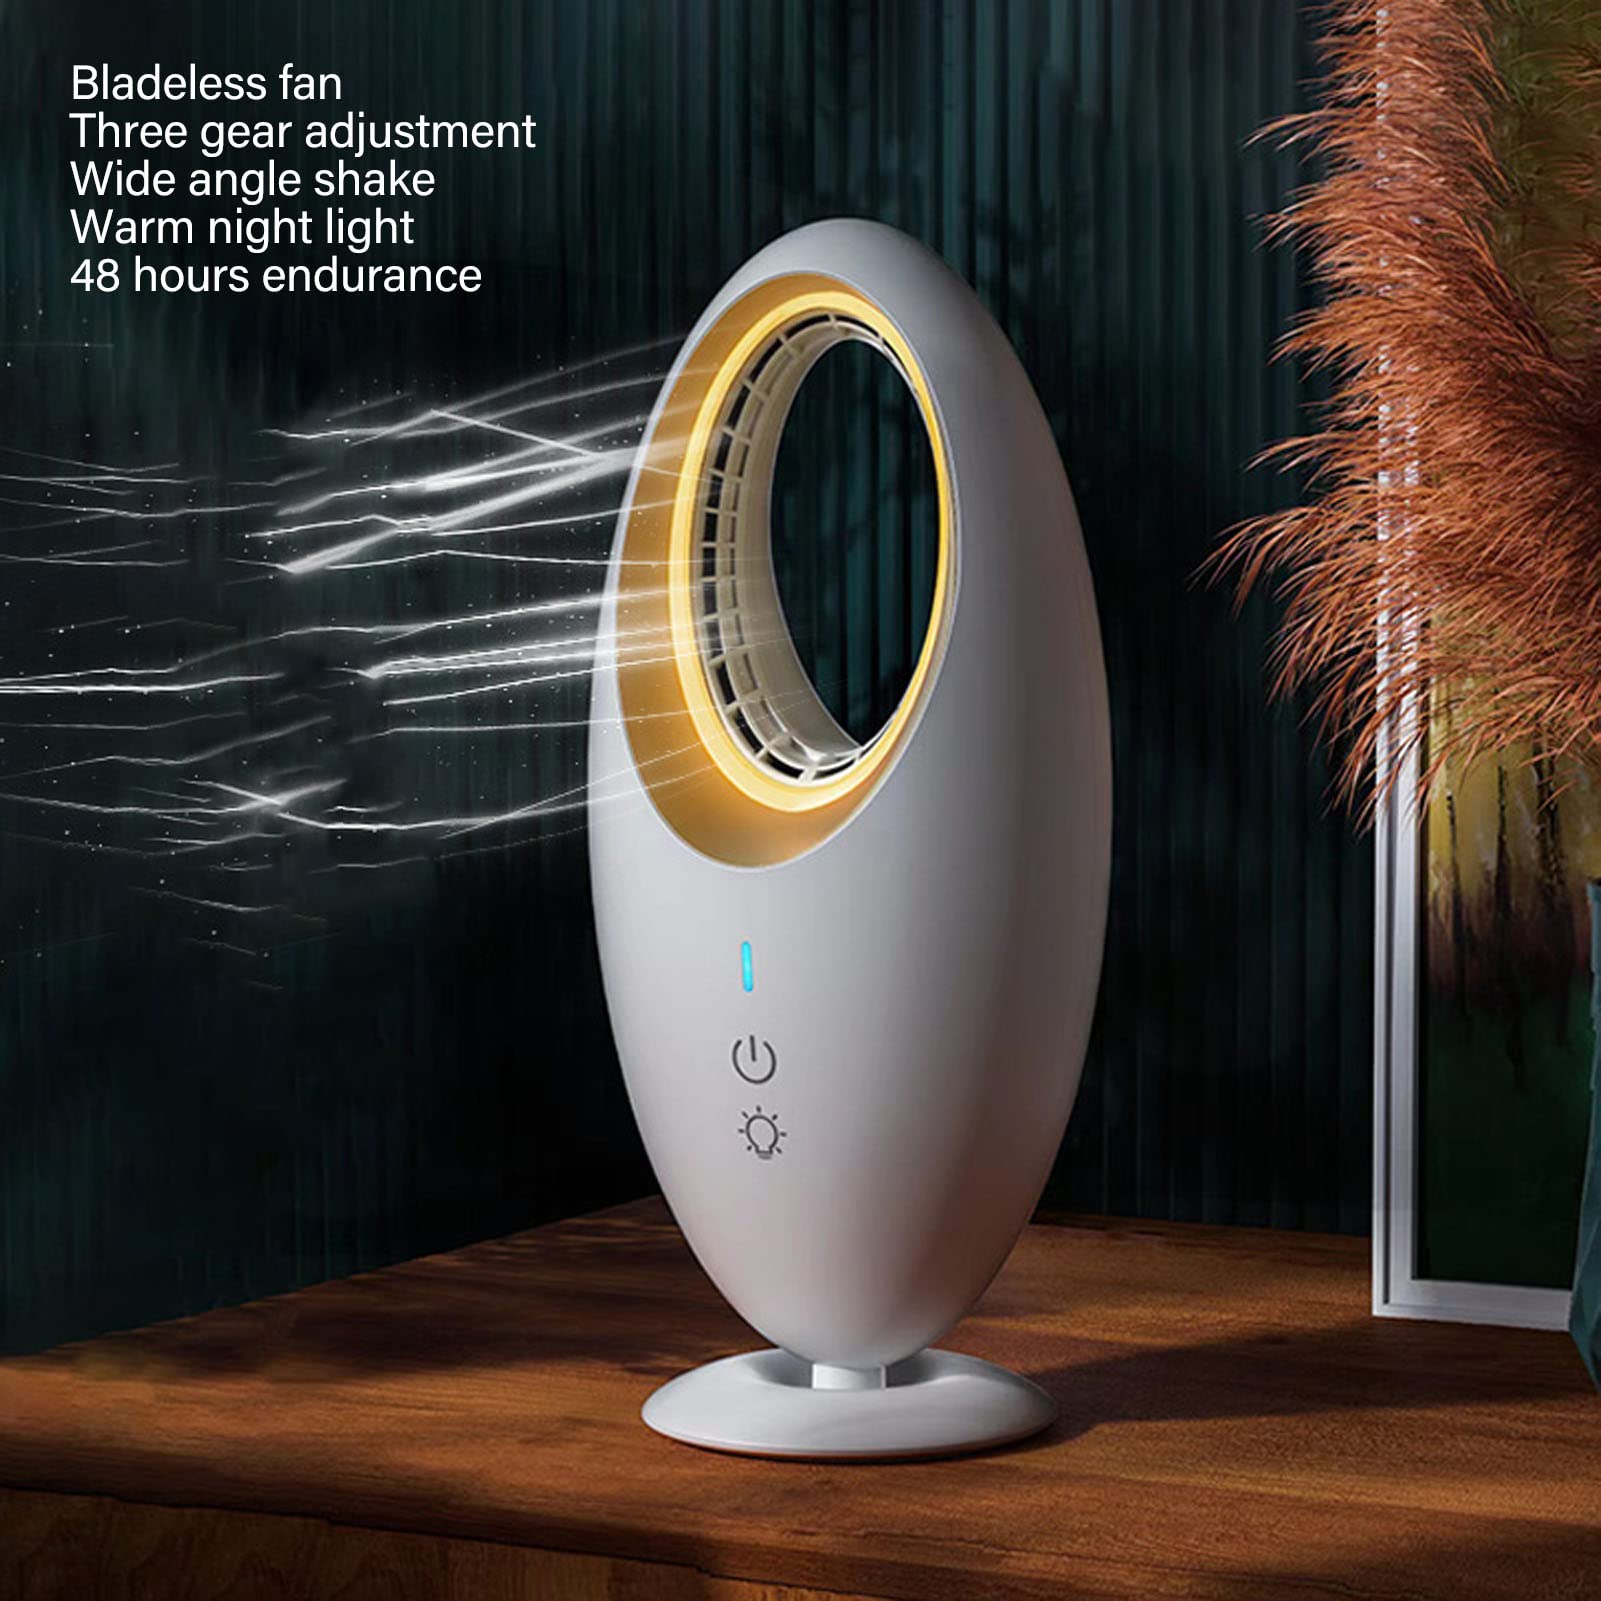 Desk Bladeless Fan - Small Table Fan with Touch Control & LED Light - Small Quiet Cooling Fan - USB Rechargeable Oscillating Fan - Personal Portable Fan for Office Home Bedroom